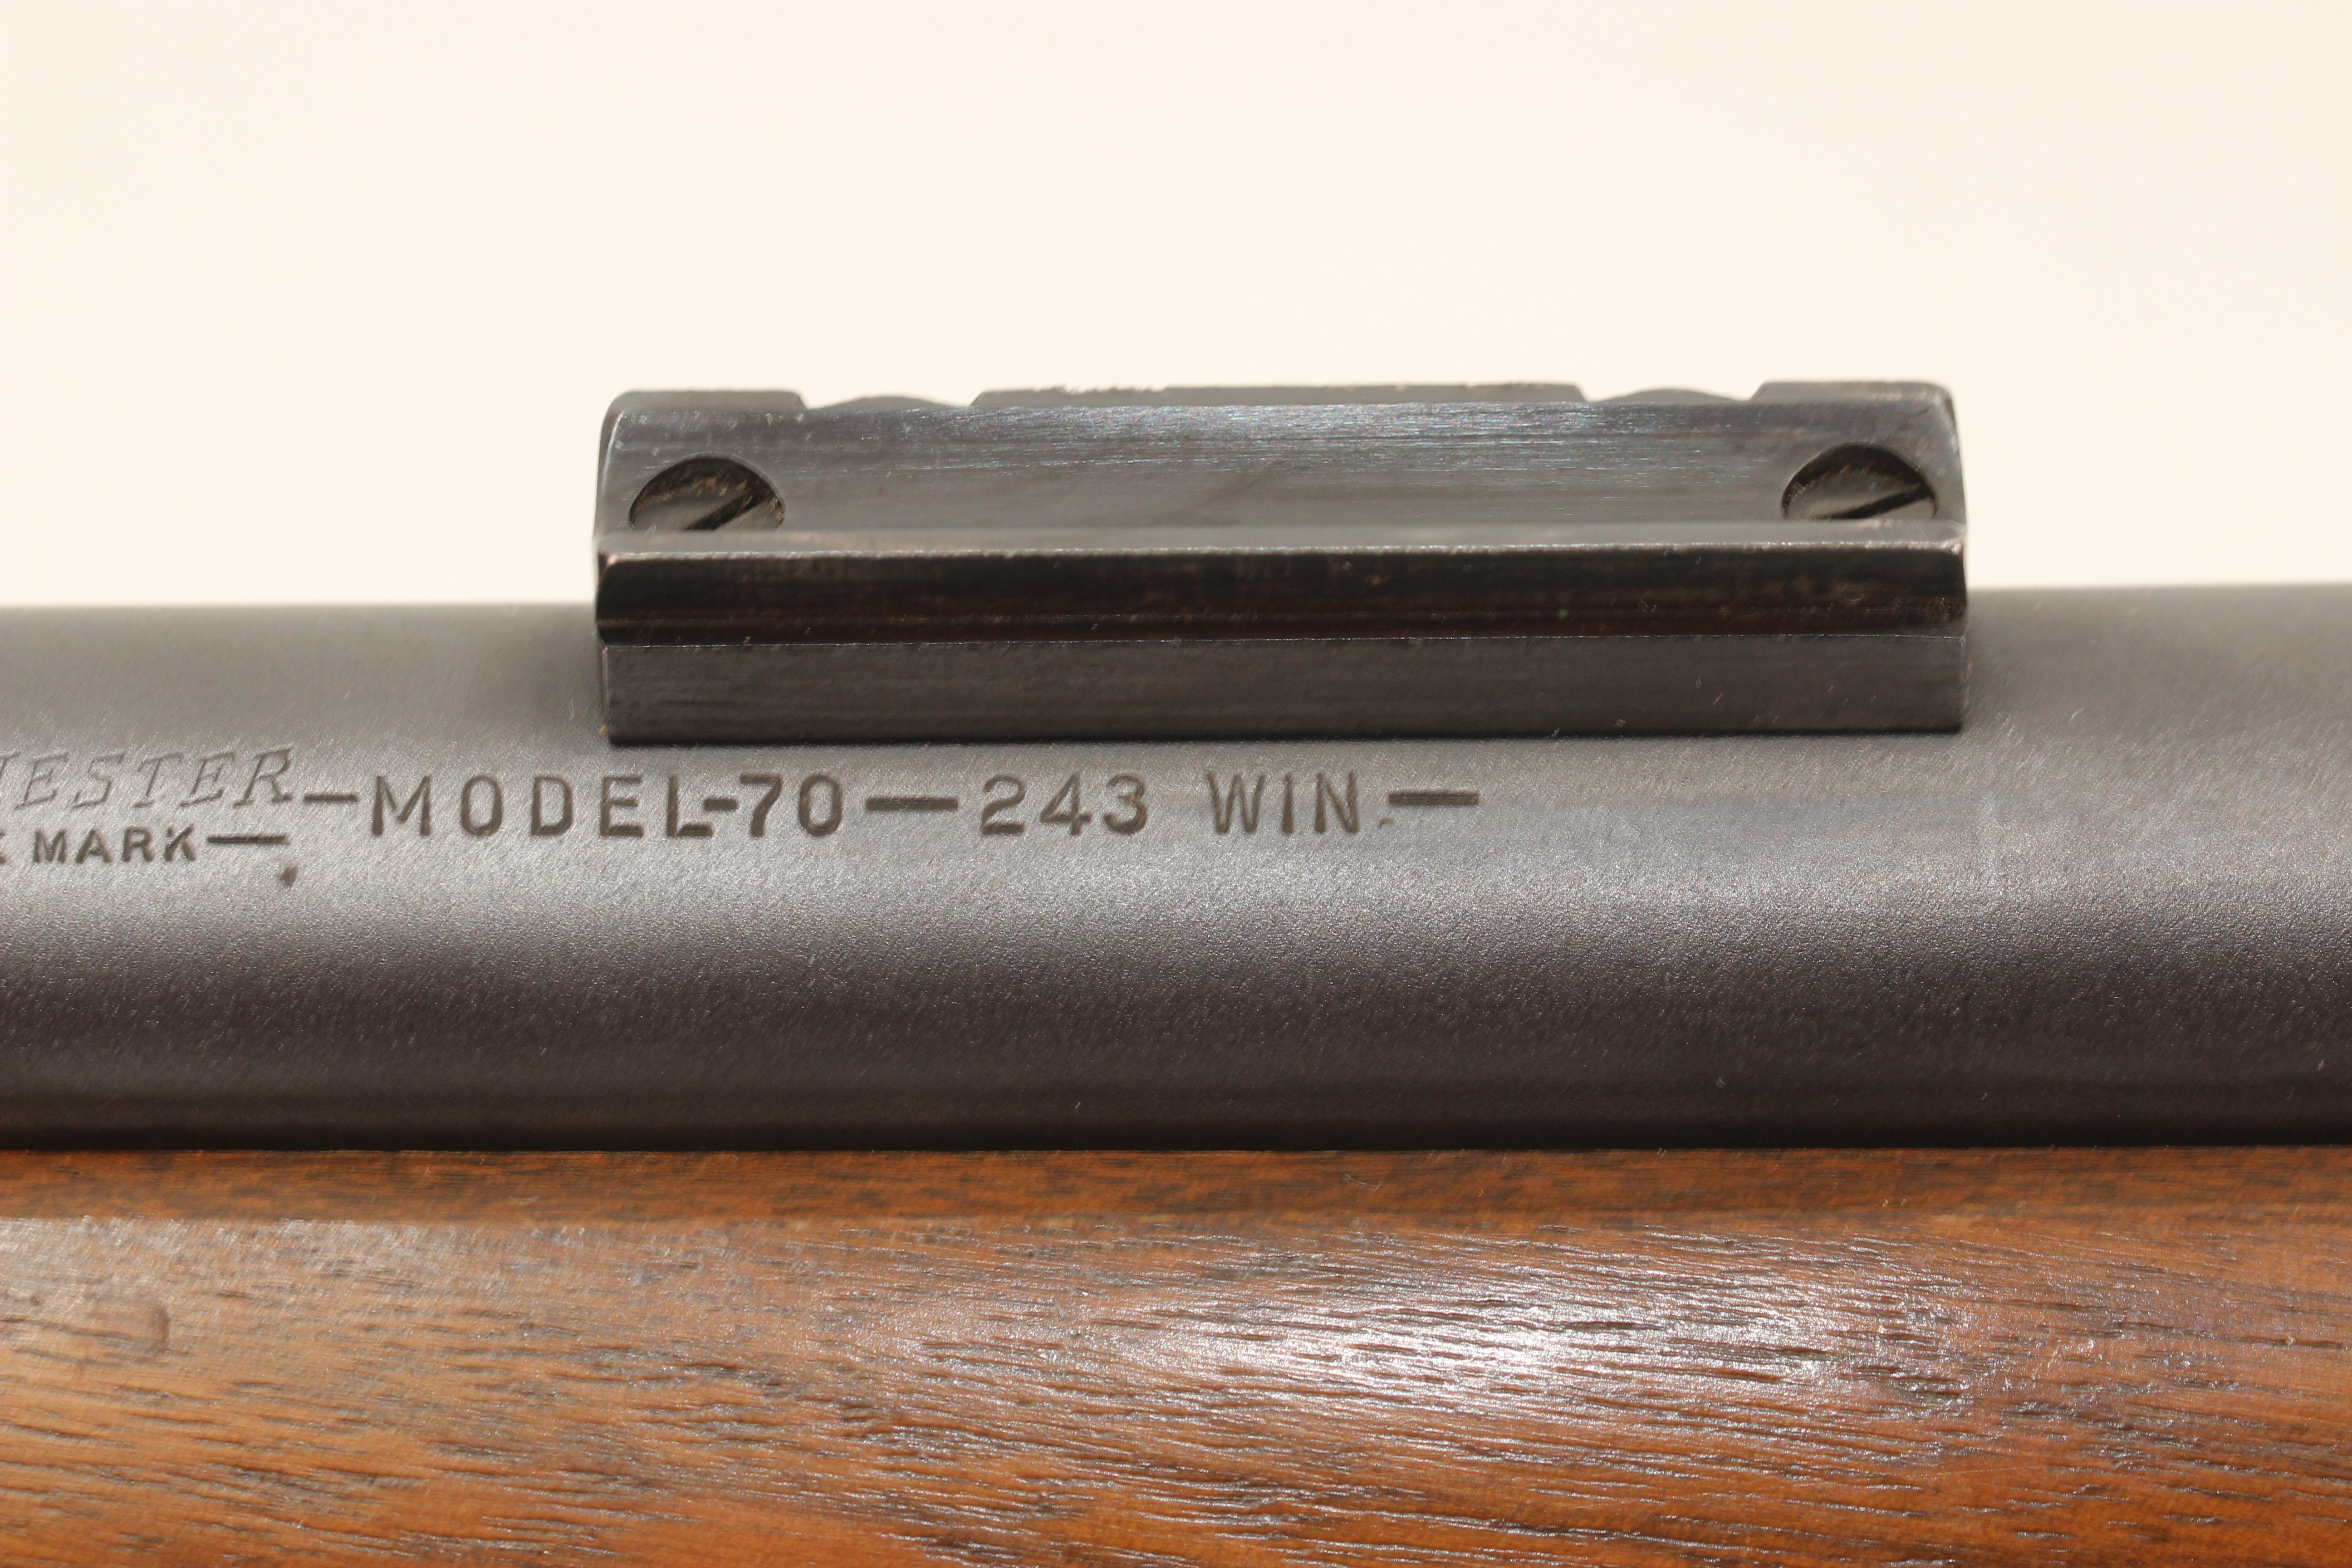 .243 Winchester Target Rifle - 1957